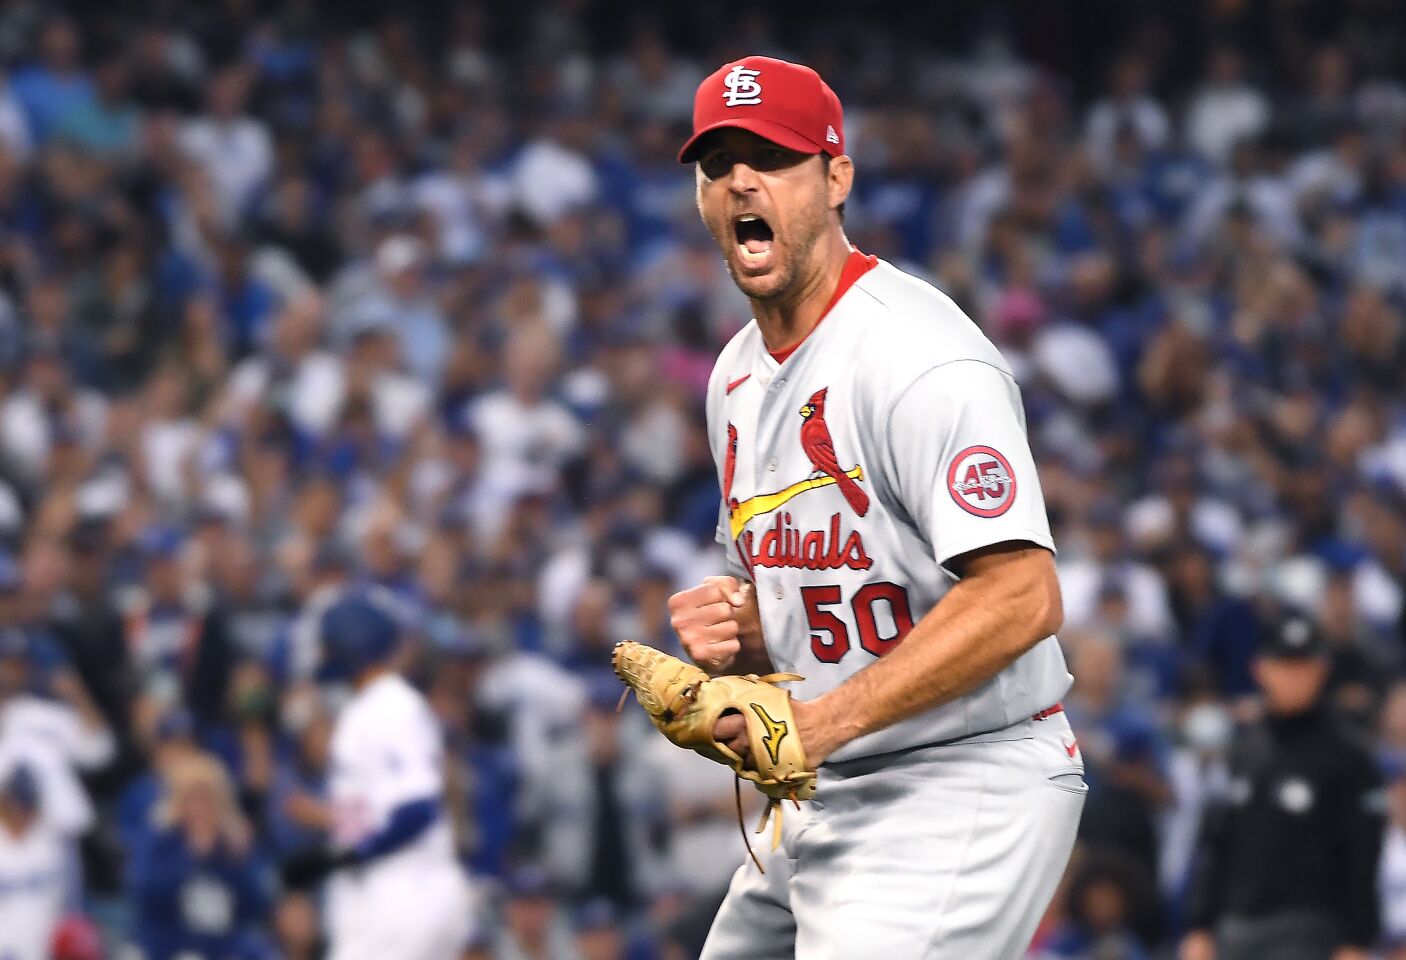 St. Louis Cardinals starting pitcher Adam Wainwright celebrates after a pitch during the fourth inning